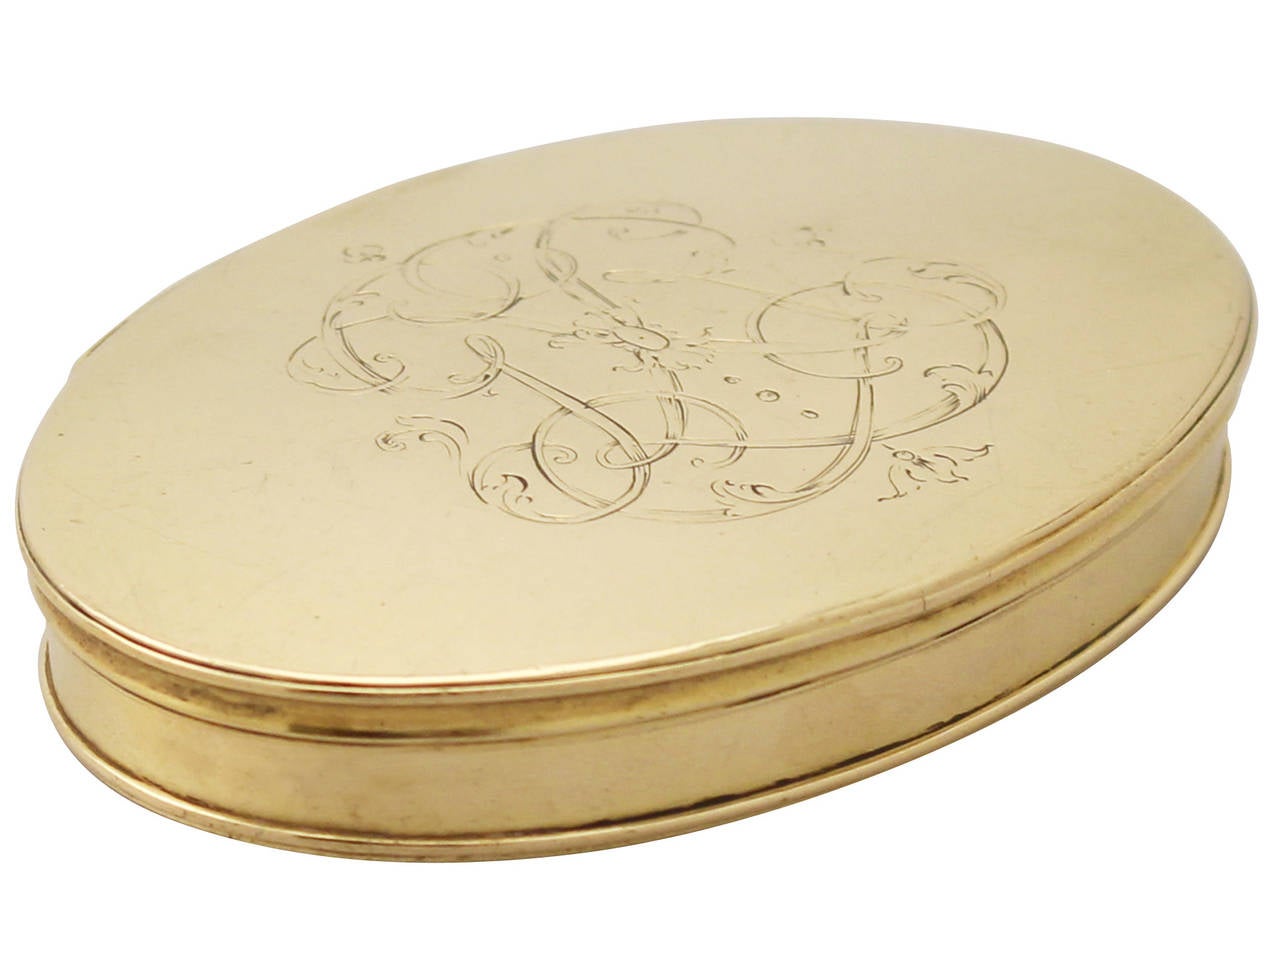 An exceptional, fine and impressive antique continental 20 karat yellow gold snuff box; an addition to our 18th century collection.

This exceptional antique 18th century 20-karat yellow gold snuff box has a plain oval form.

The surface of this